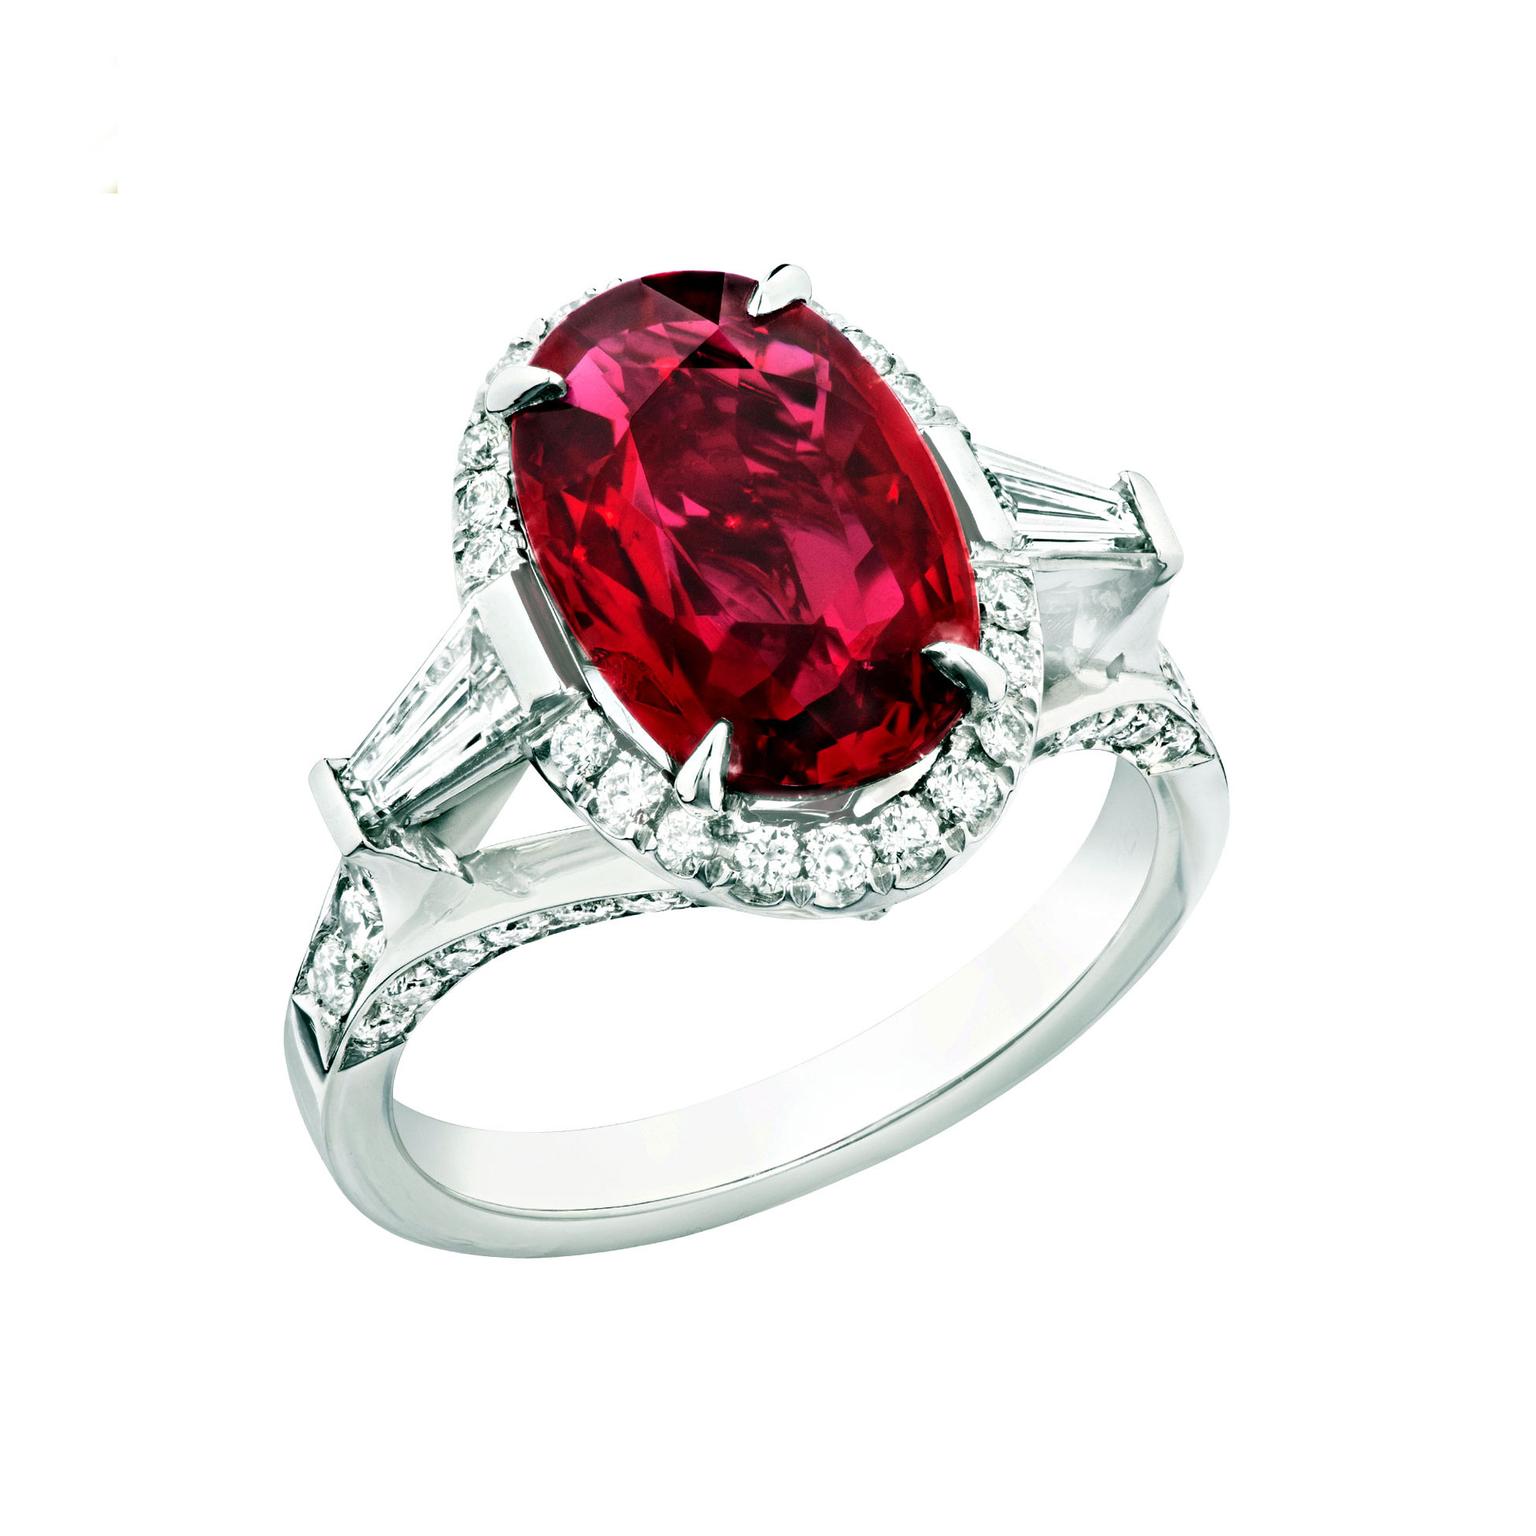 Faberge Devotion ruby ring 5ct